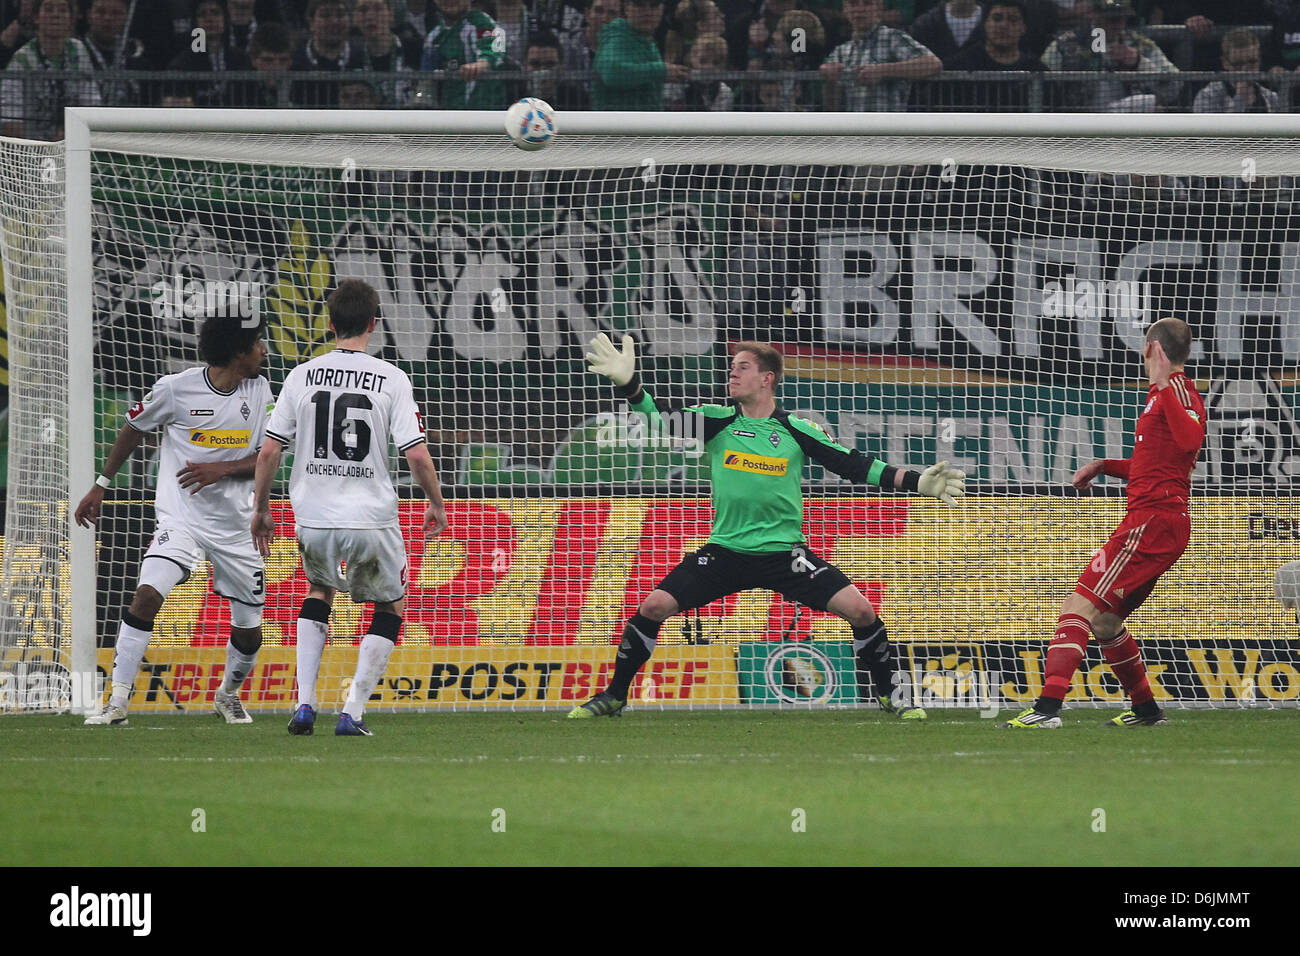 Munich's Arjen Robben kicks the ball over the goal while Moenchengladbach'  s goal keeper Marc-Andre ter Stegen (C) and teammate Havard Nordtveit (L) look on during the DFB Cup semifinal soccer match between Borussia Moenchengladbacj and Bayern Munich at the Borussia Park in Moenchengladbach, Germany, 21 March 2012. Photo: Revierfoto Stock Photo